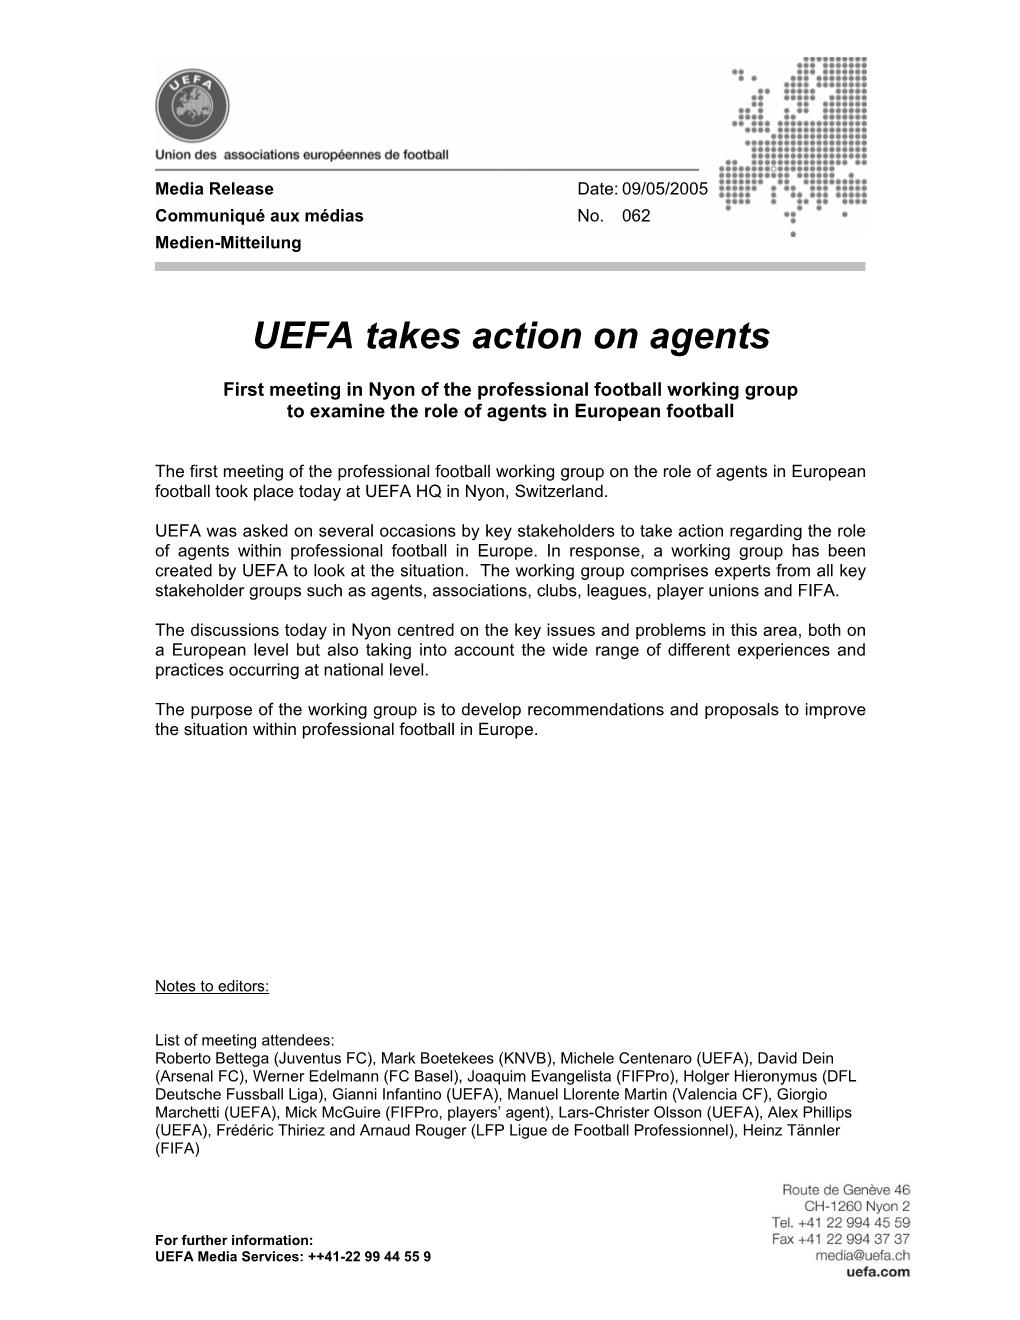 UEFA Takes Action on Agents